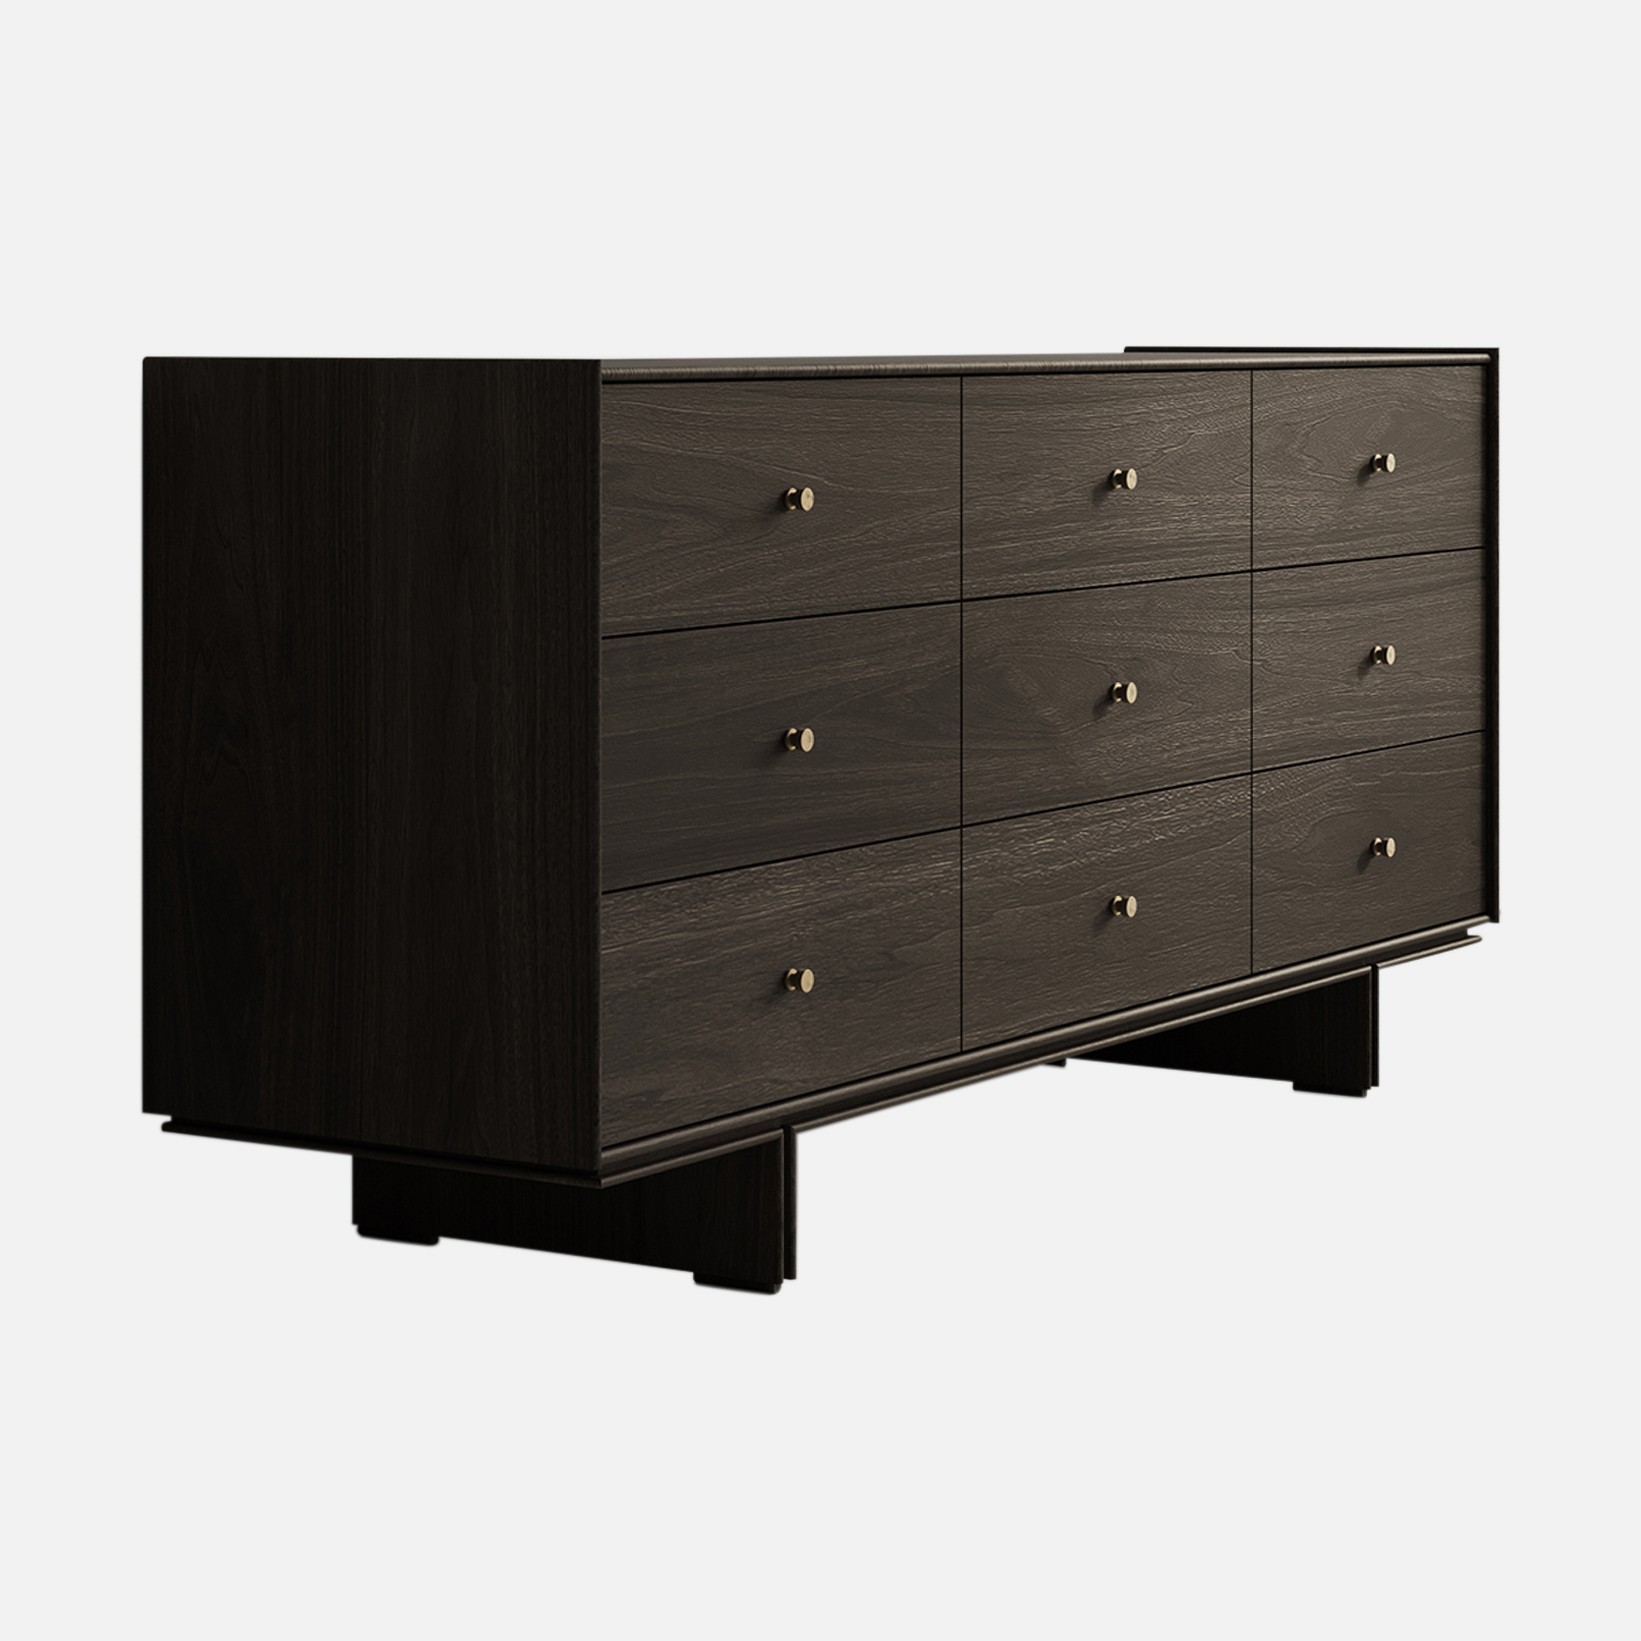 a black and brown dresser sitting on top of a white wall